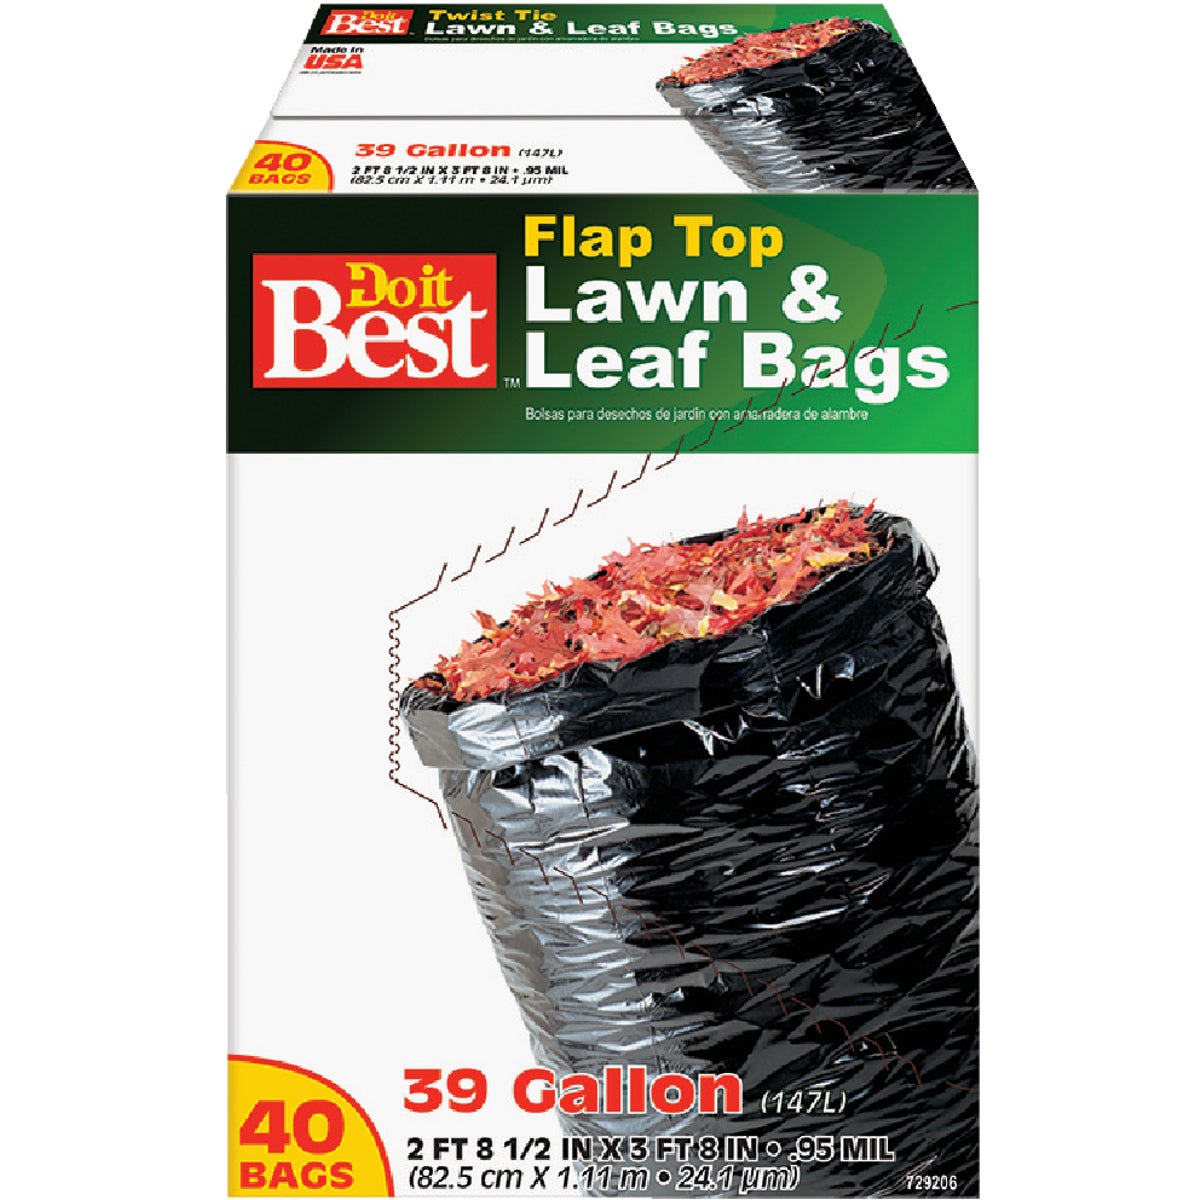 Item 729206, Lawn &amp; leaf bag fits up to a 39-gallon can. Flap tie closure.